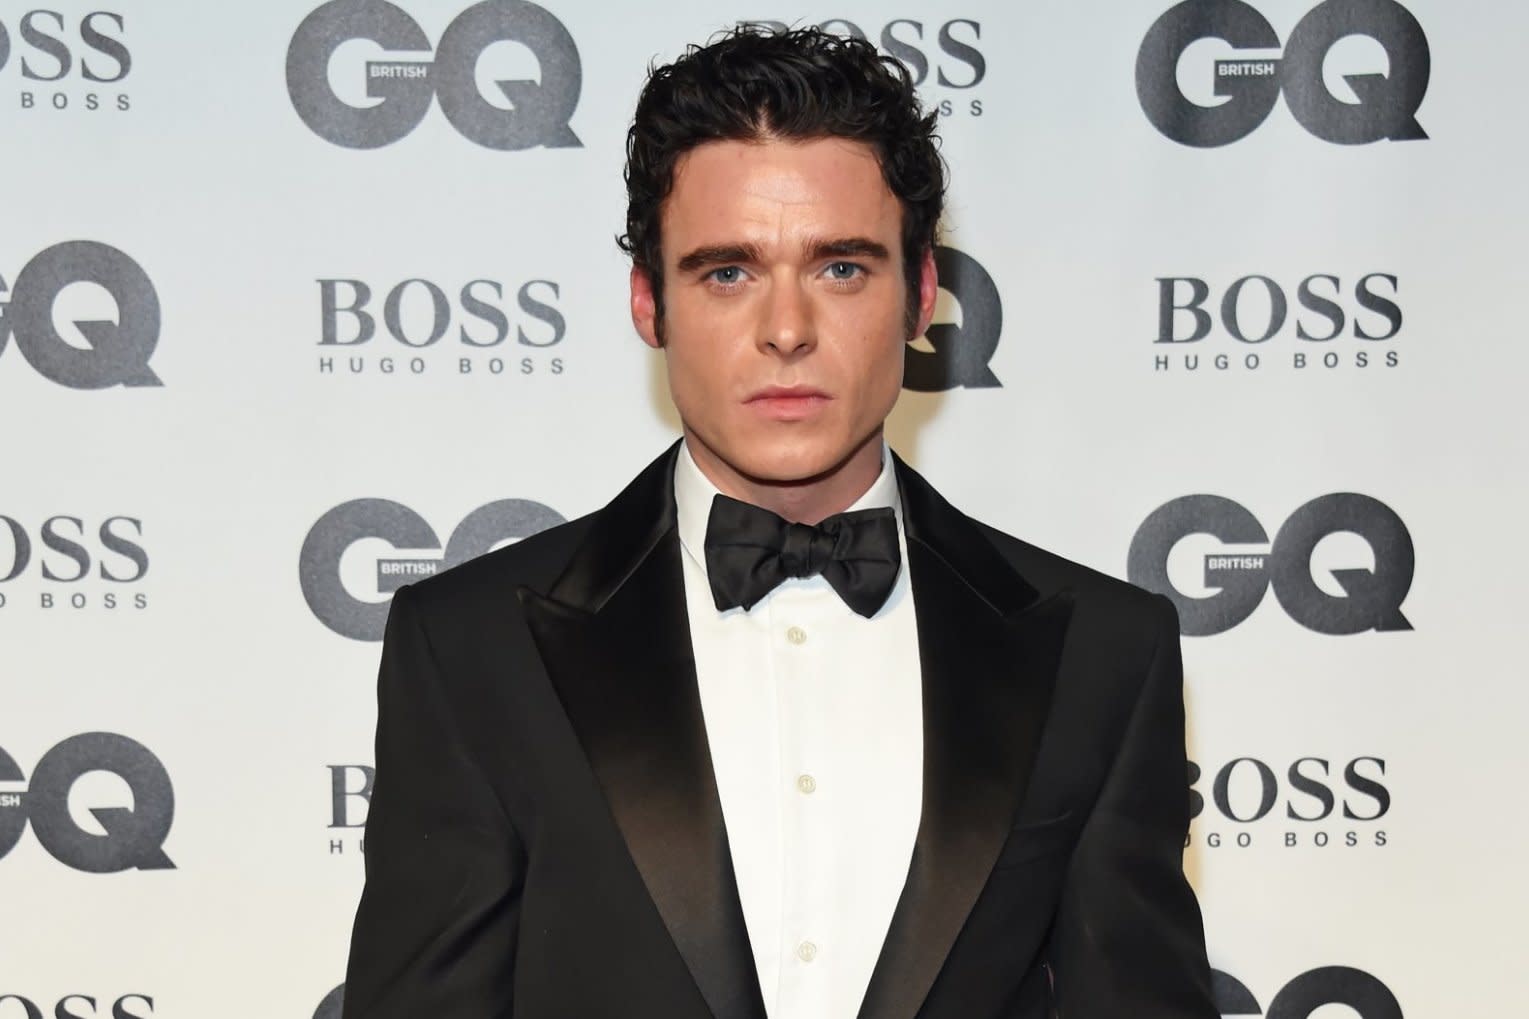 Richard Madden Now Bookies Favourite To Be The Next 007